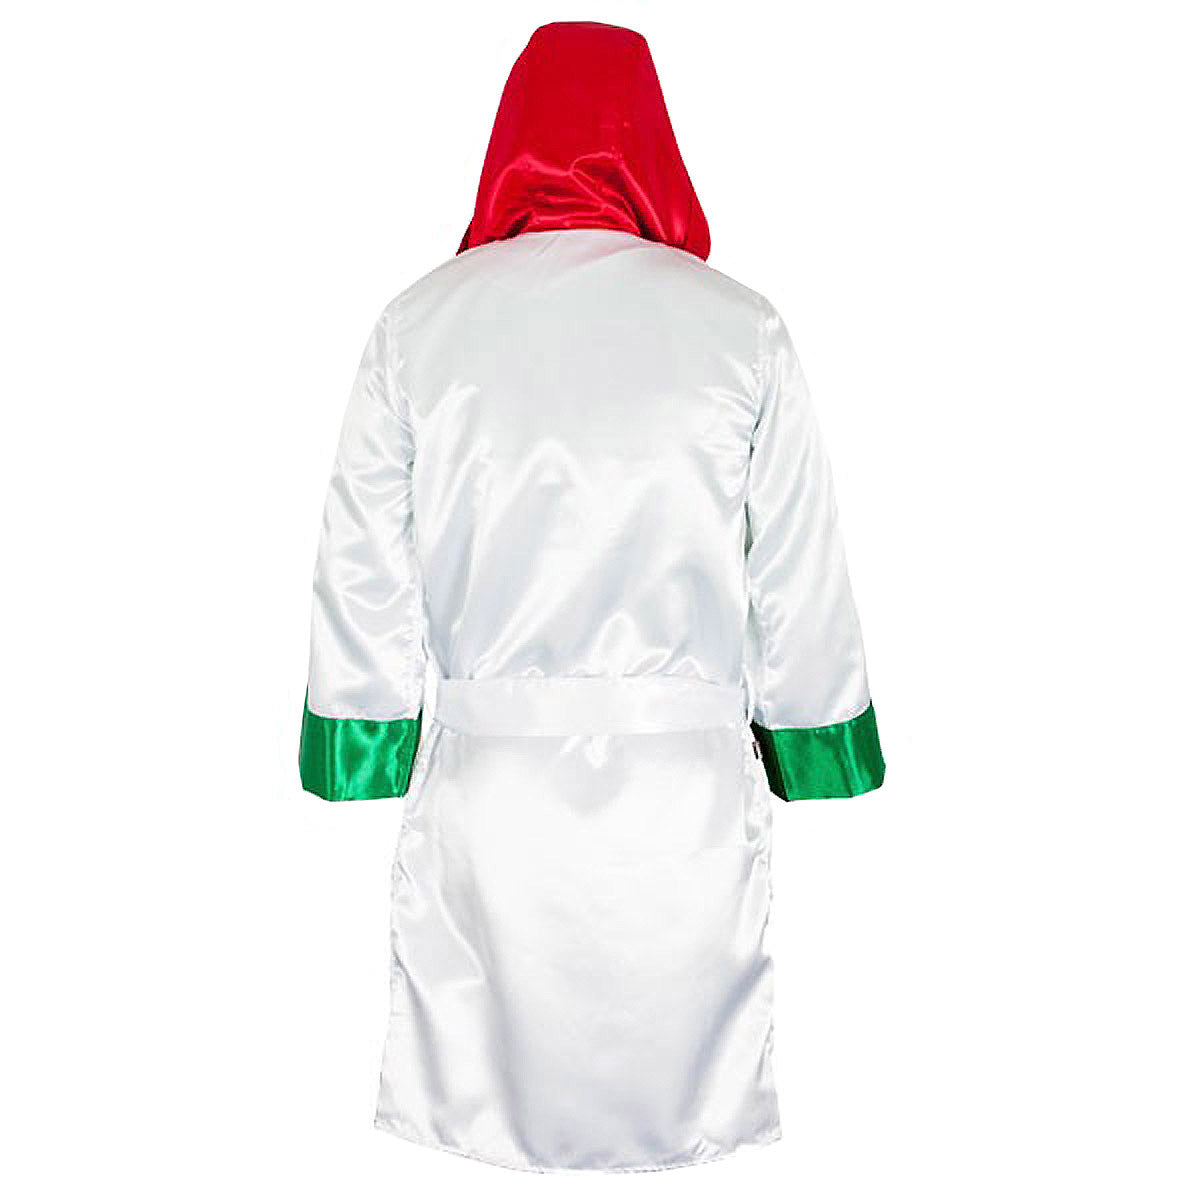 Cleto Reyes Satin Boxing Robe with Hood - Large - Mexican Flag Cleto Reyes